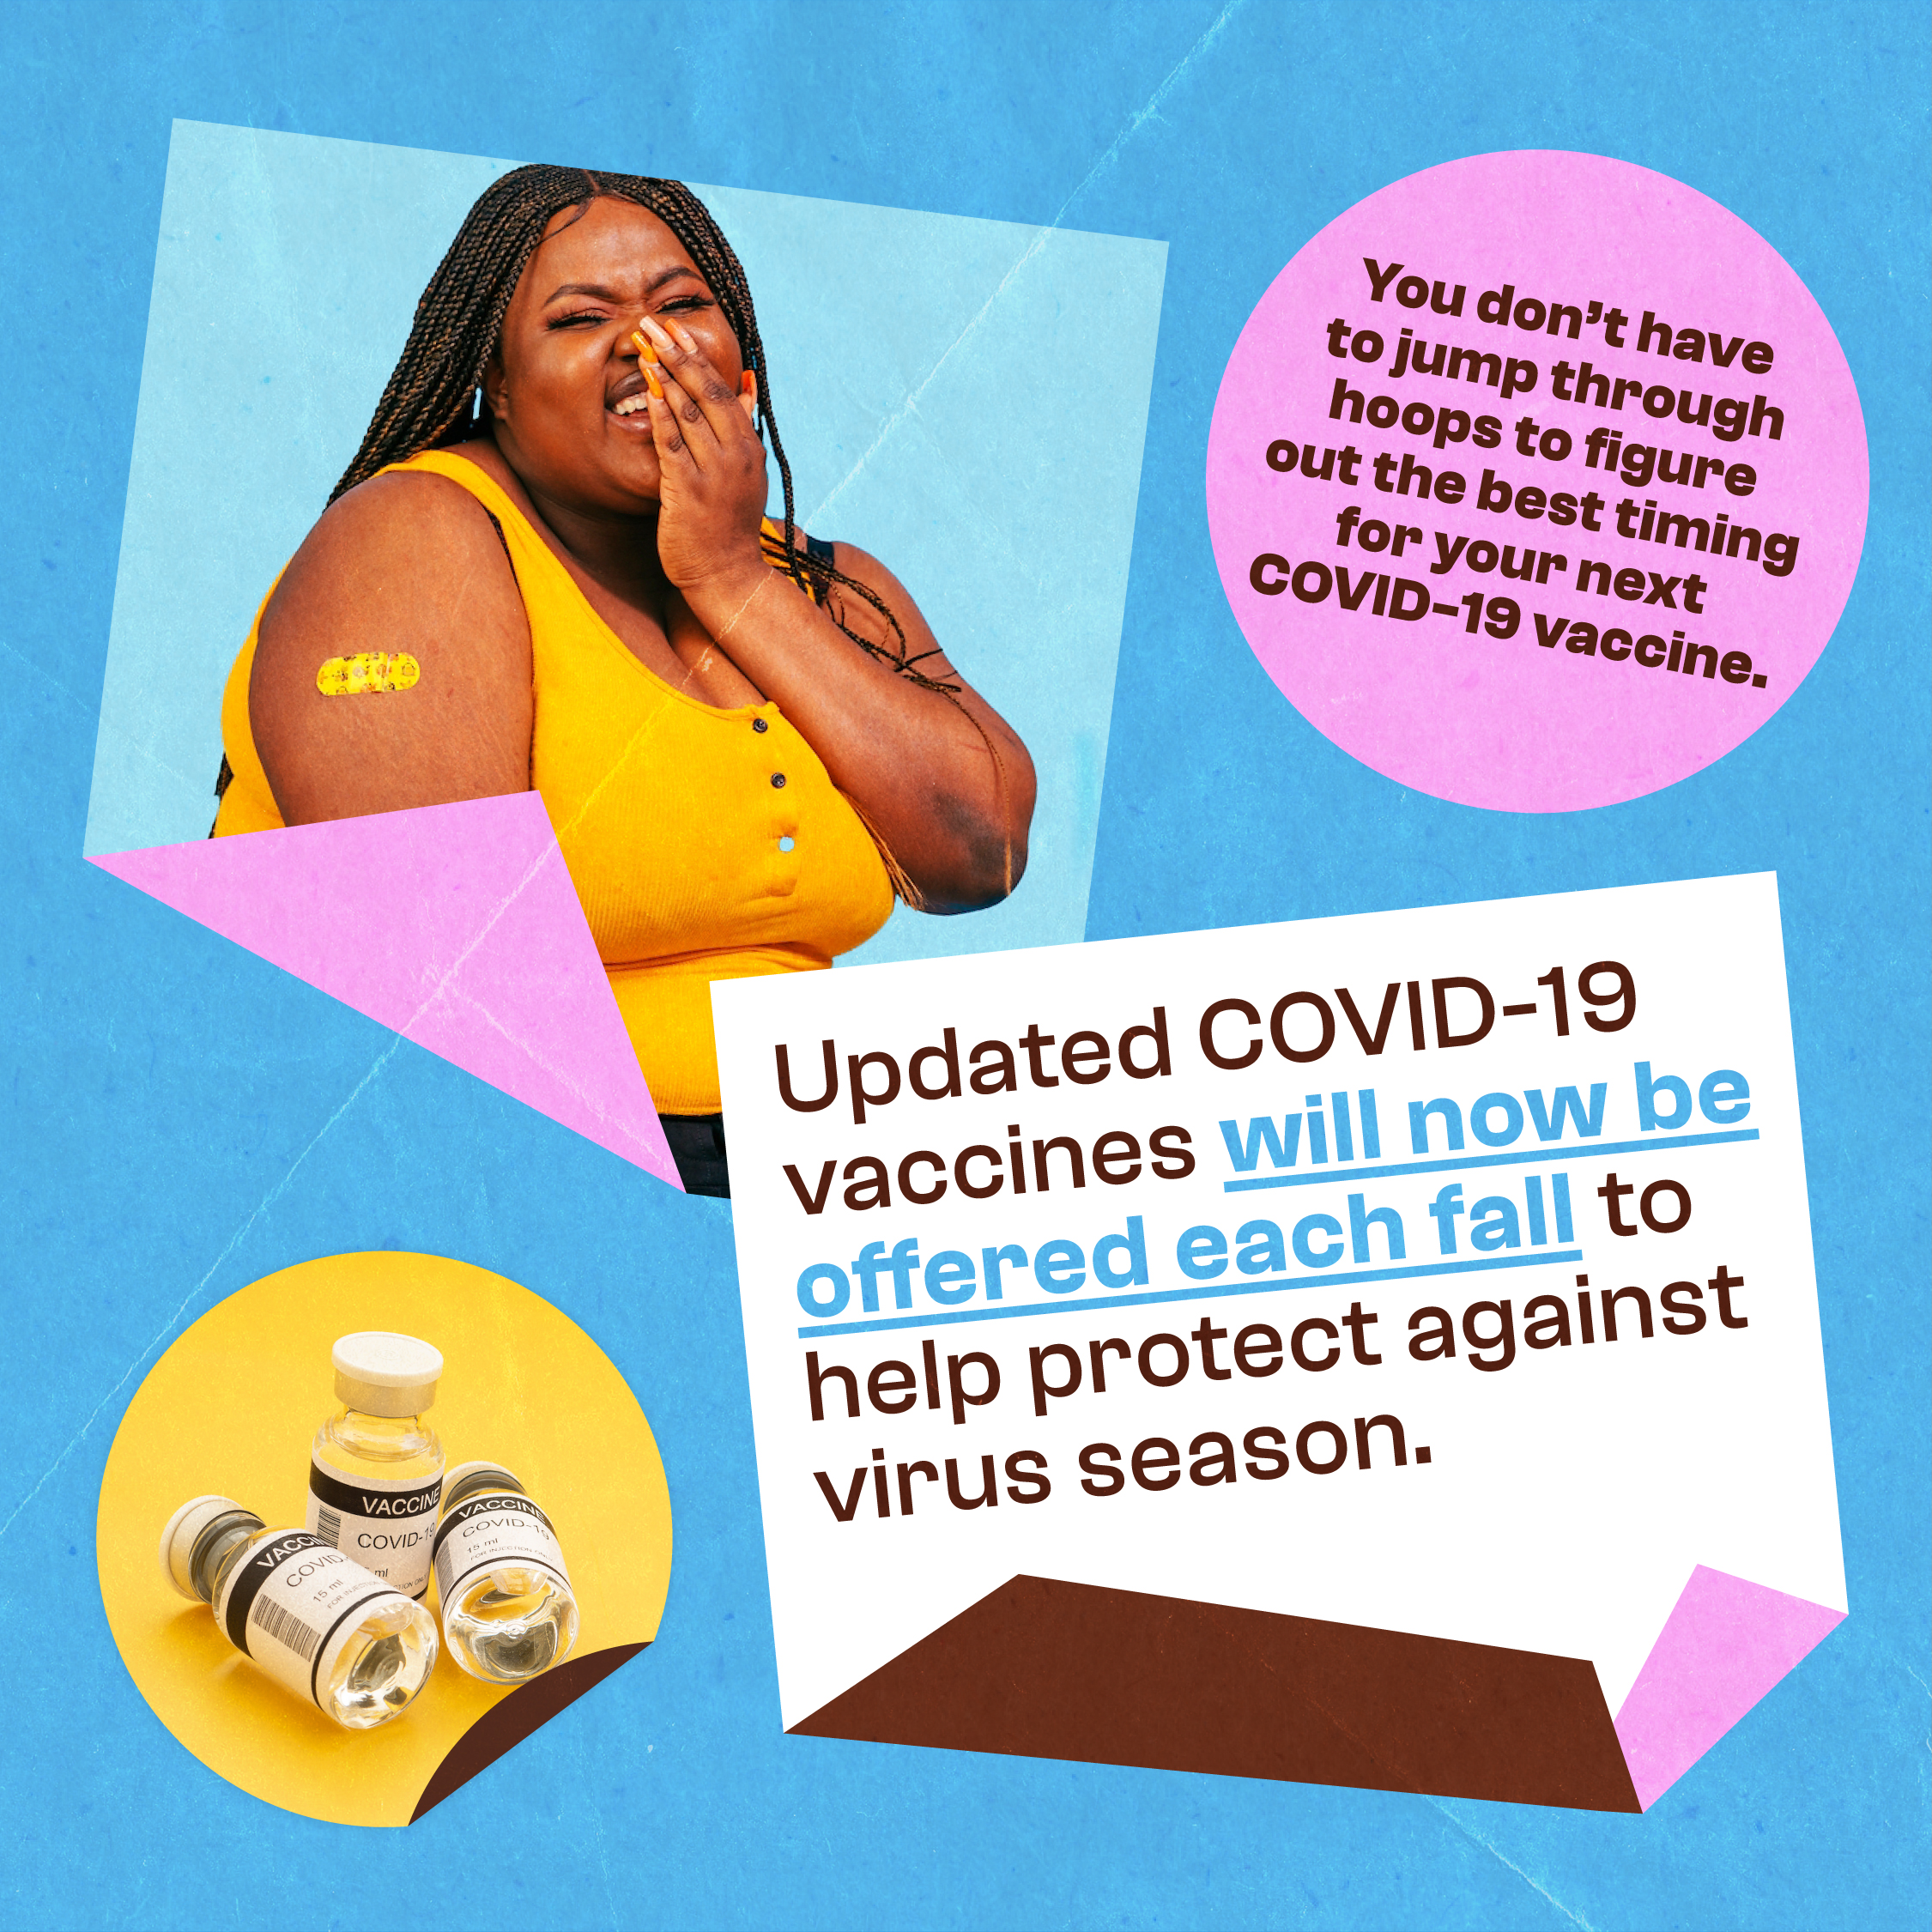 A graphic containing two photos, one of COVID-19 vaccine vials, and one of a black woman smiling with a bandage on her arm.